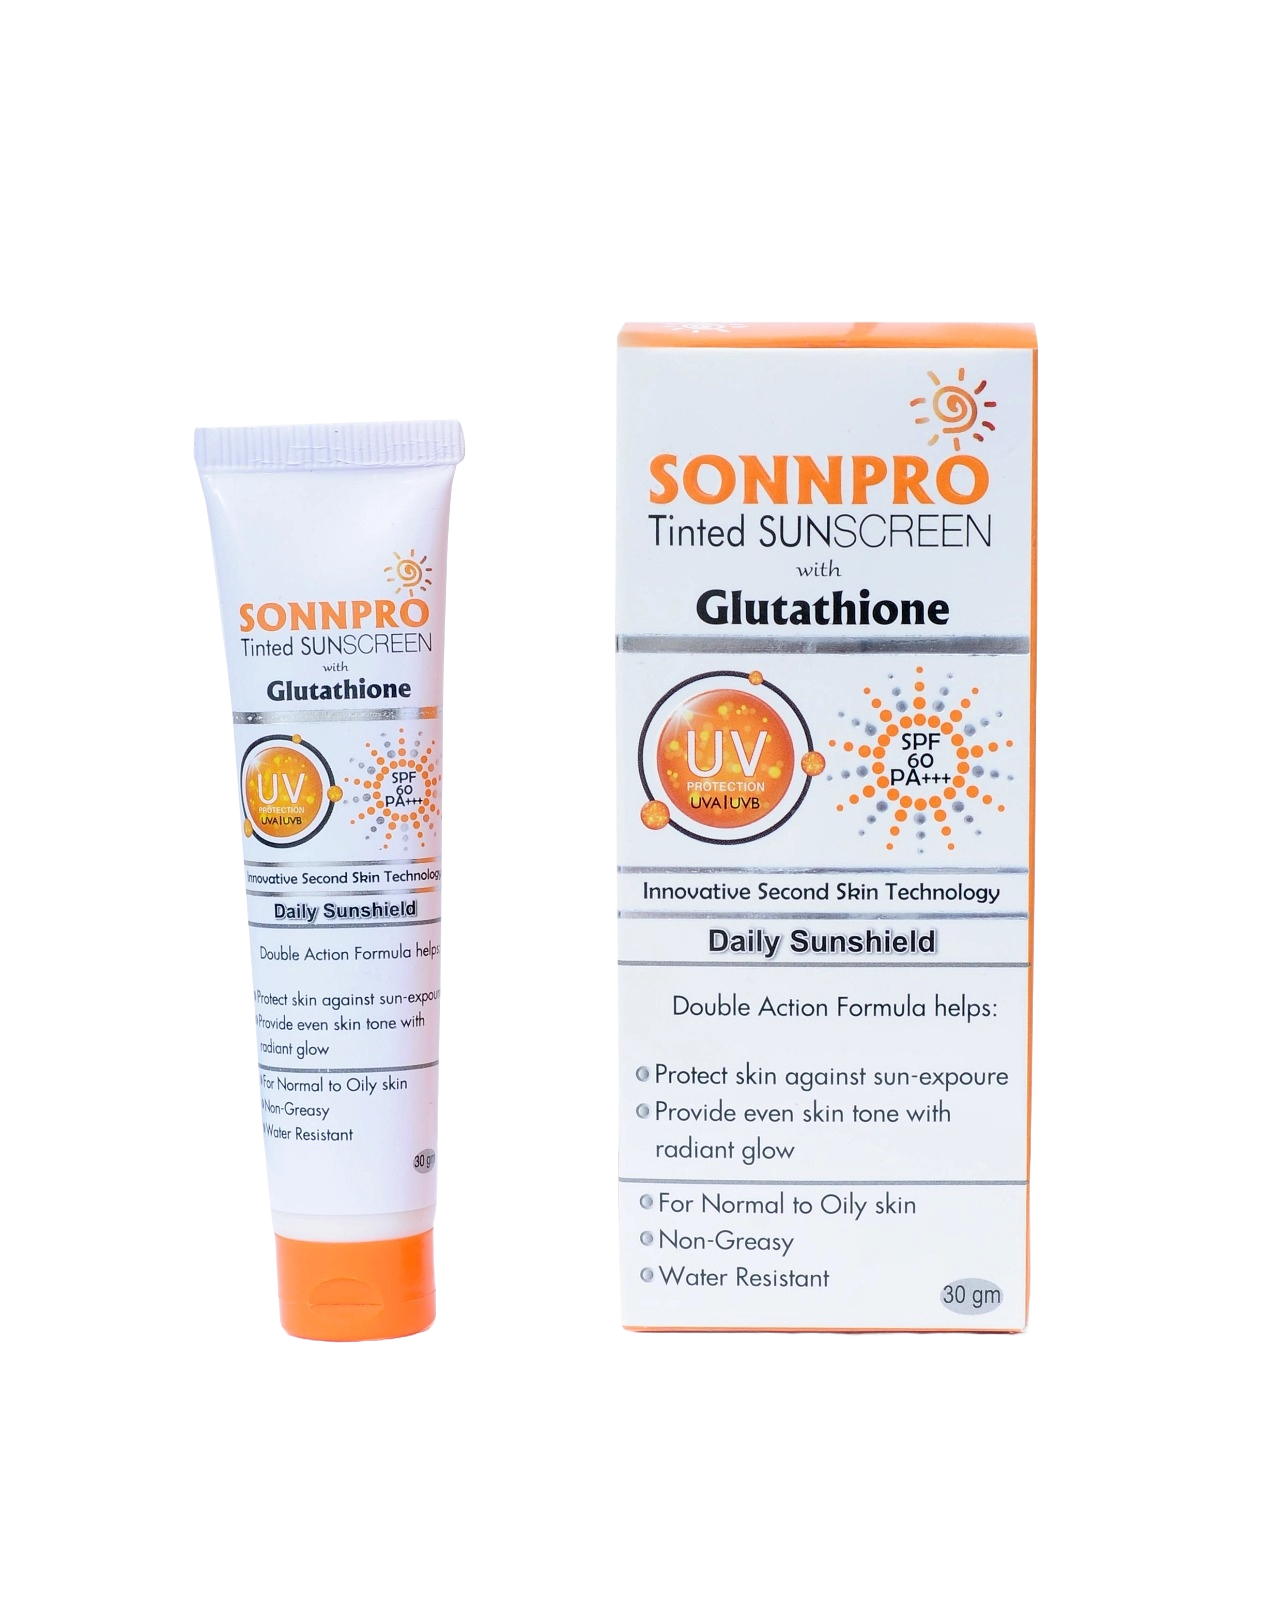 Sonnpro by seha tinted sunscreen with glutathione 30 gm - spf 60 pa     - infused with innovative 2nd skin technology, daily sunshield